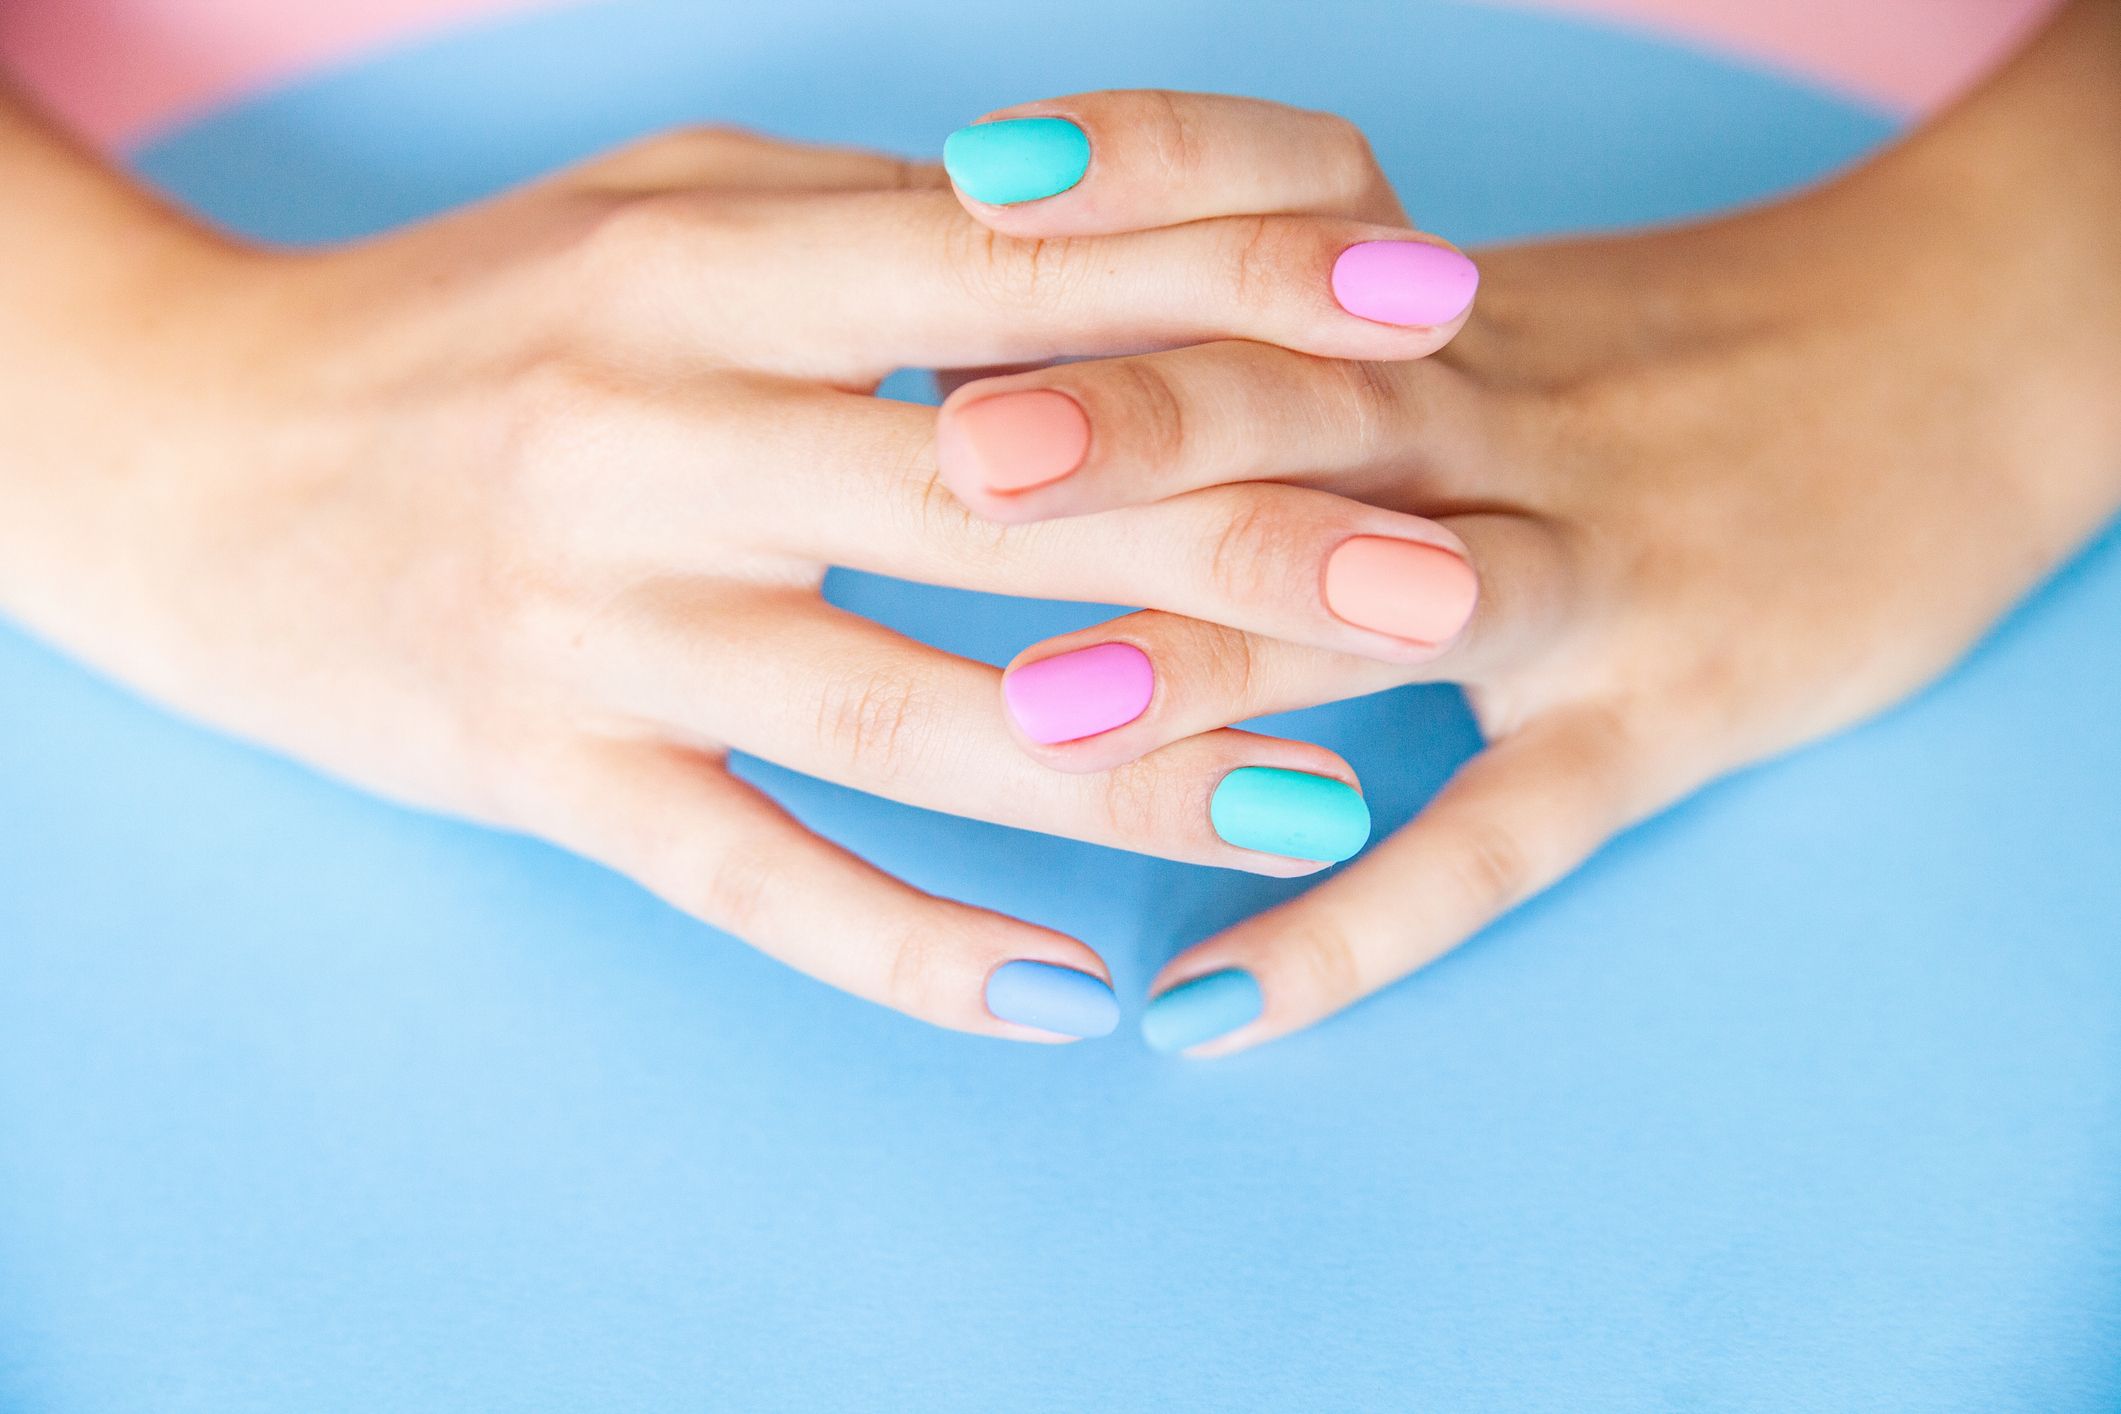 4 Tips to Make Your Manicure Results Last Longer